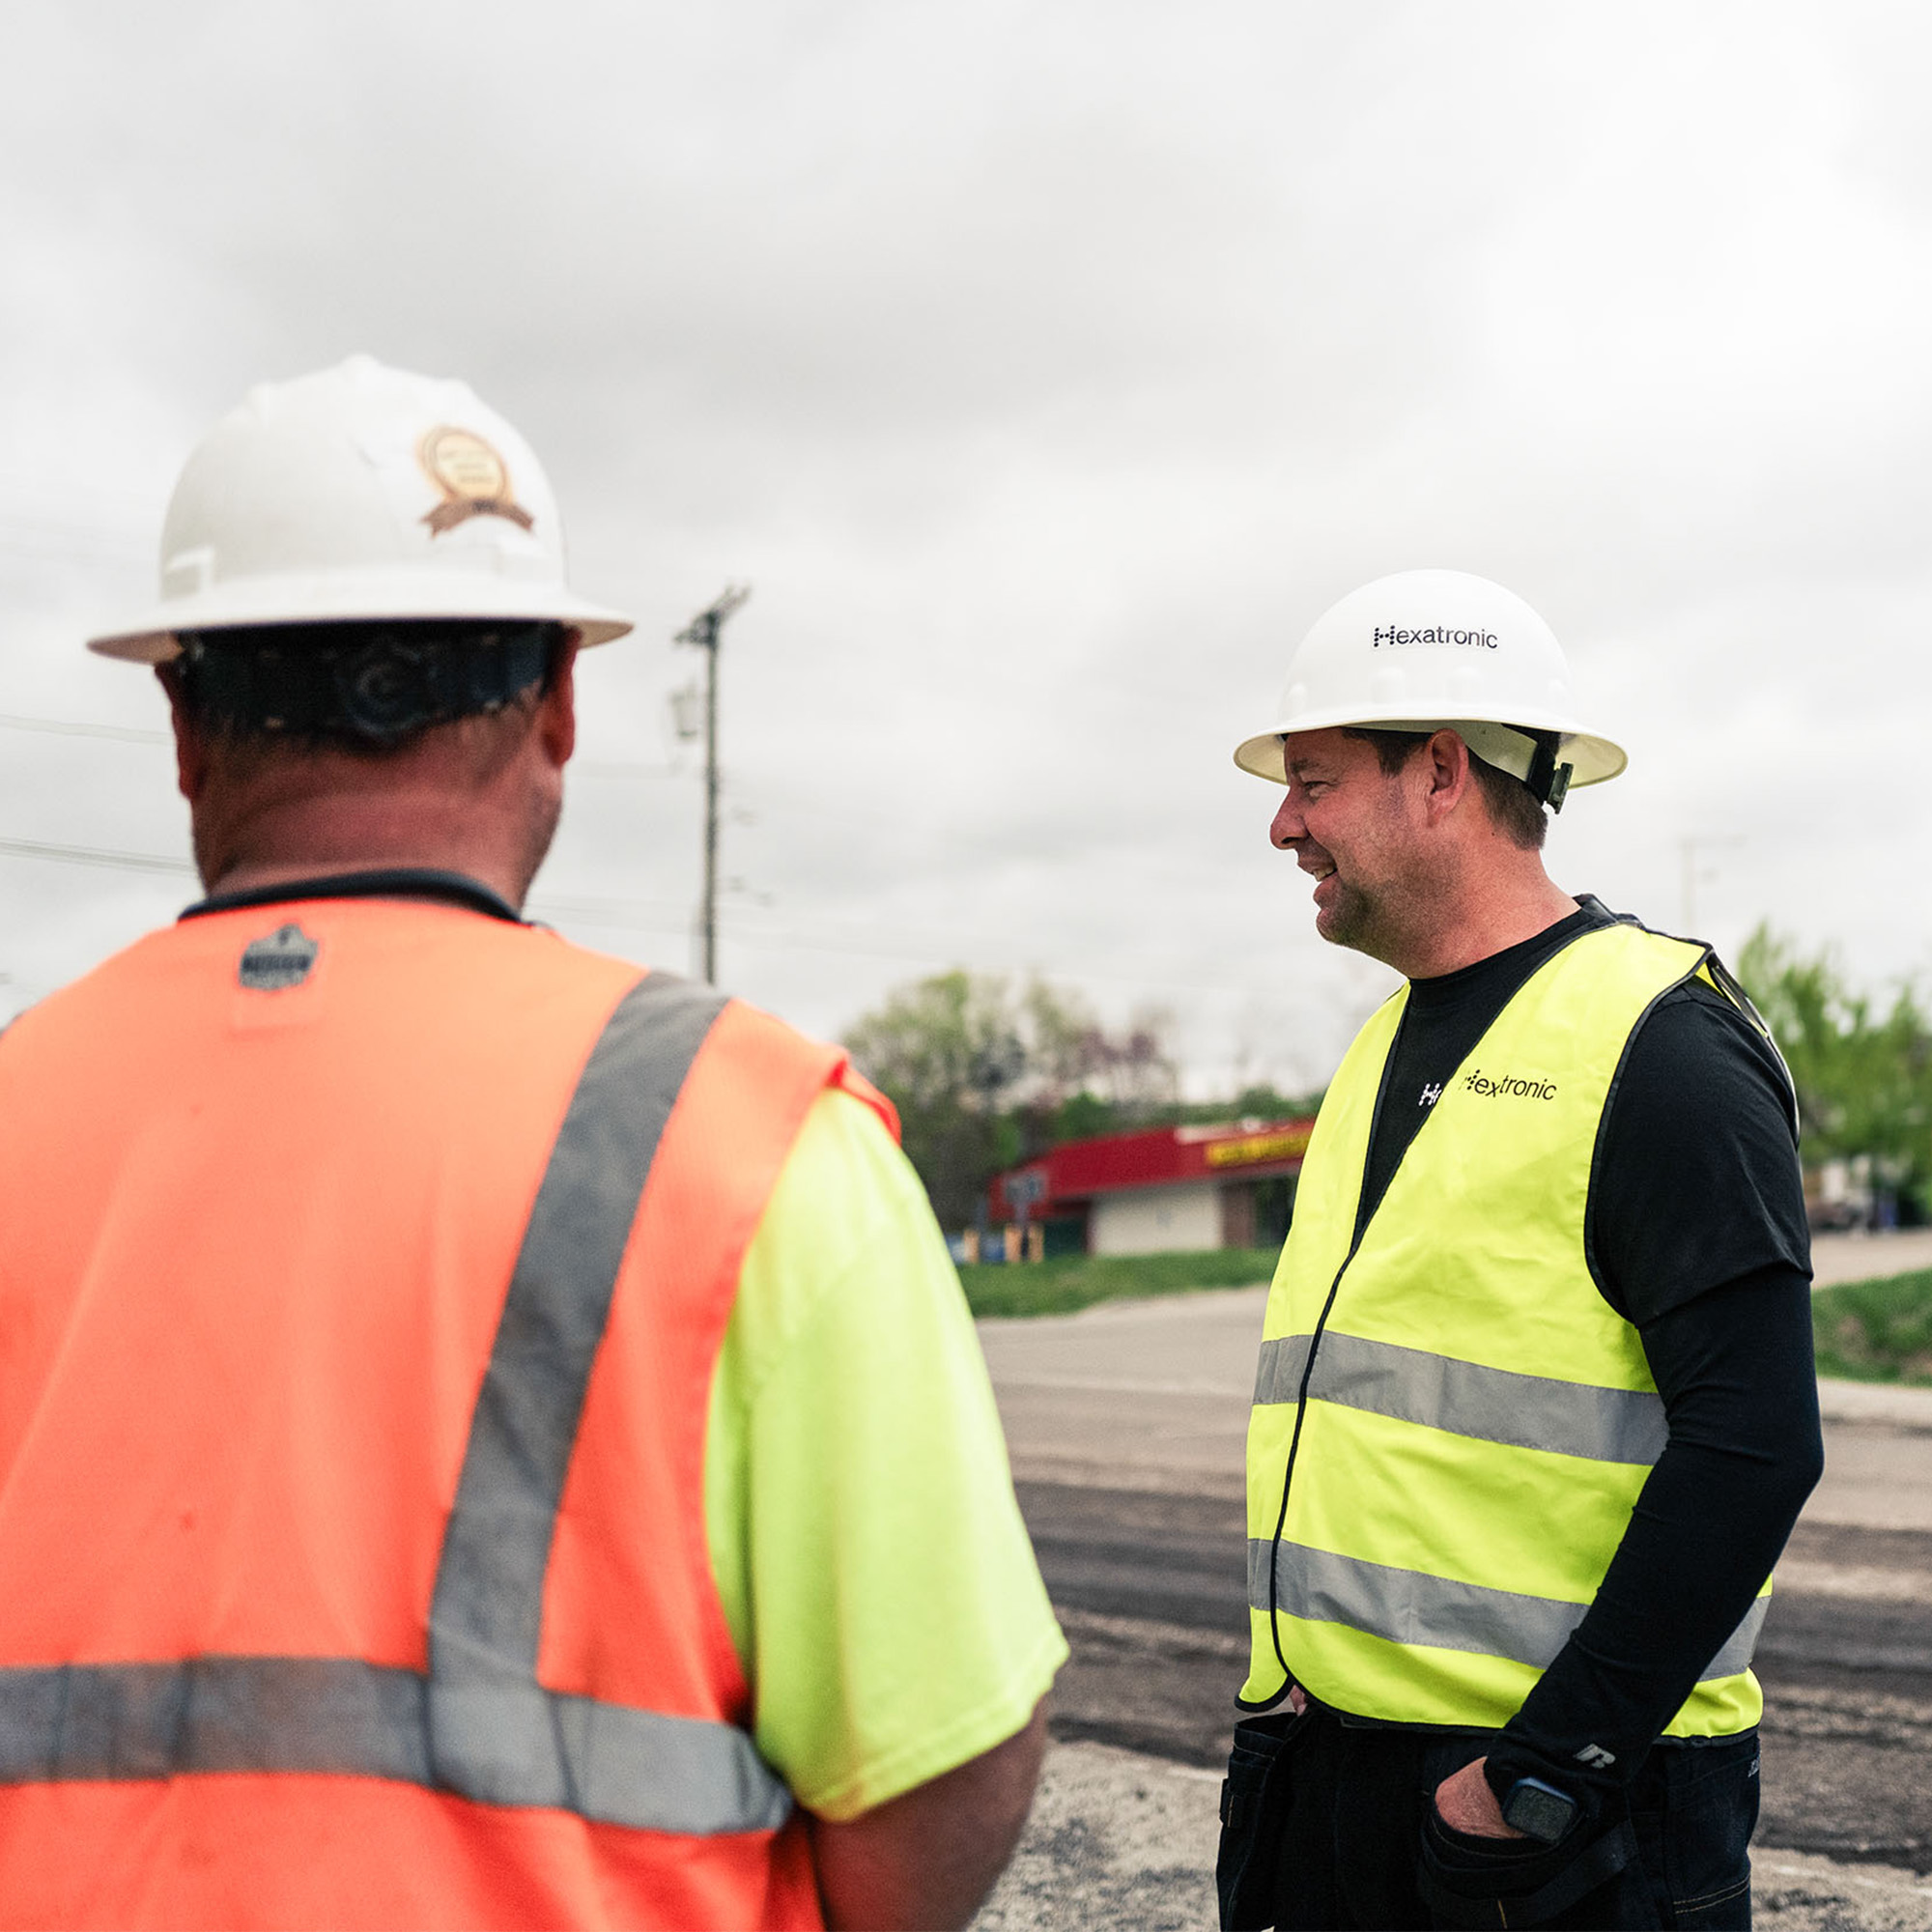 Two workers in safety gear stand near a road, possibly discussing a project. A traffic cone indicates a work area.